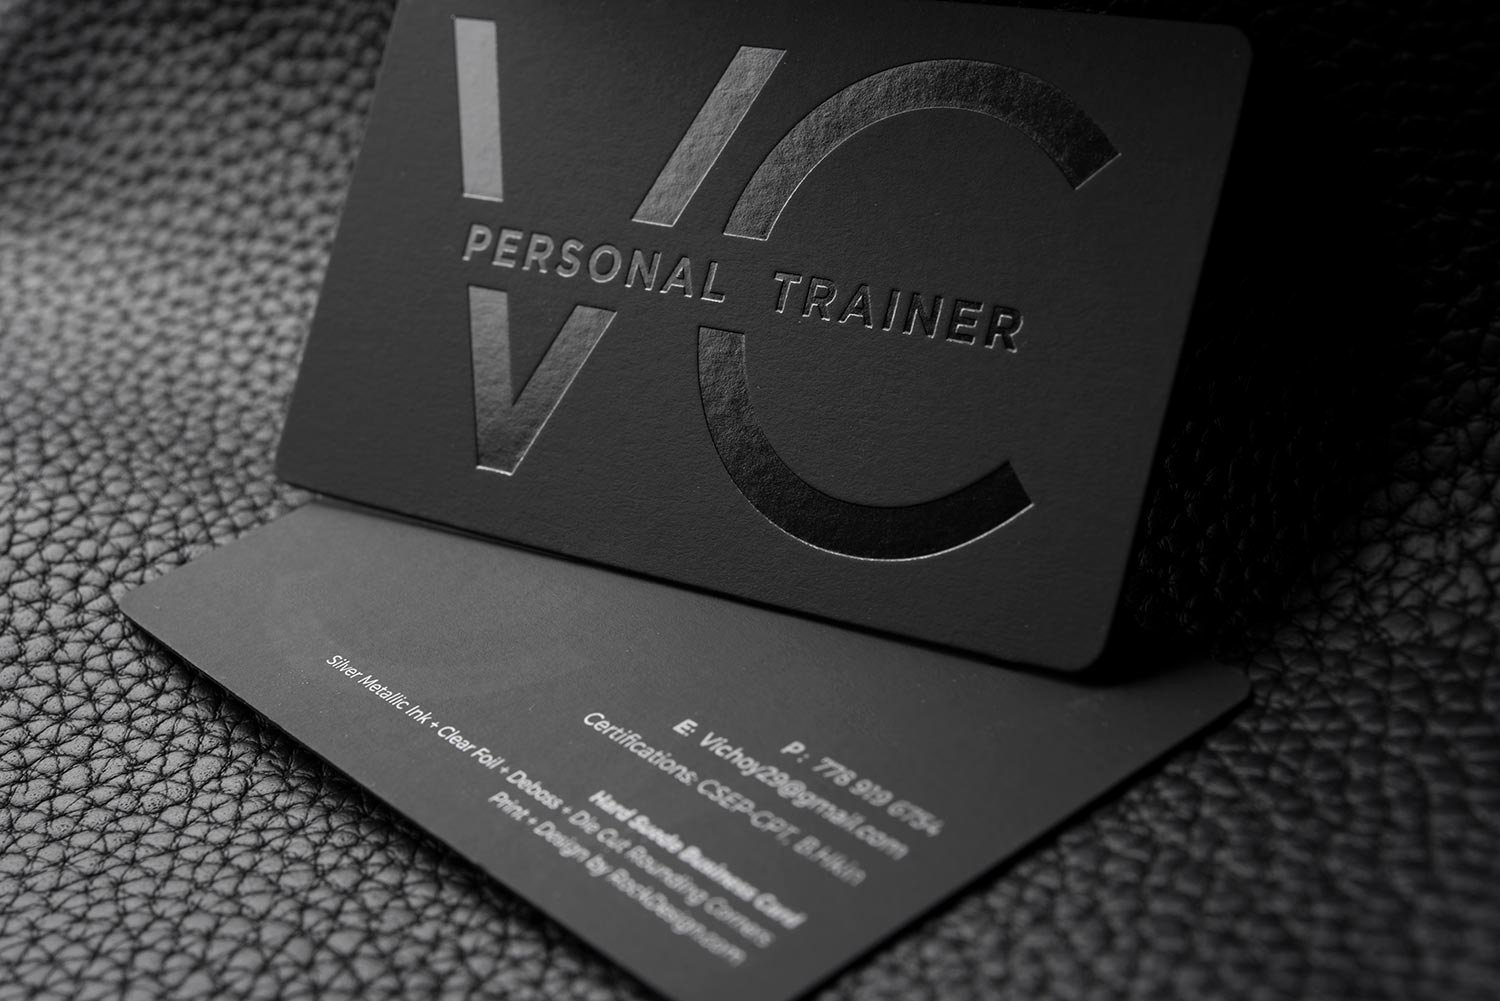 Fitness Trainer Business Cards Elegant Free Impressive Hard Suede Personal Trainer Business Card Template Vc